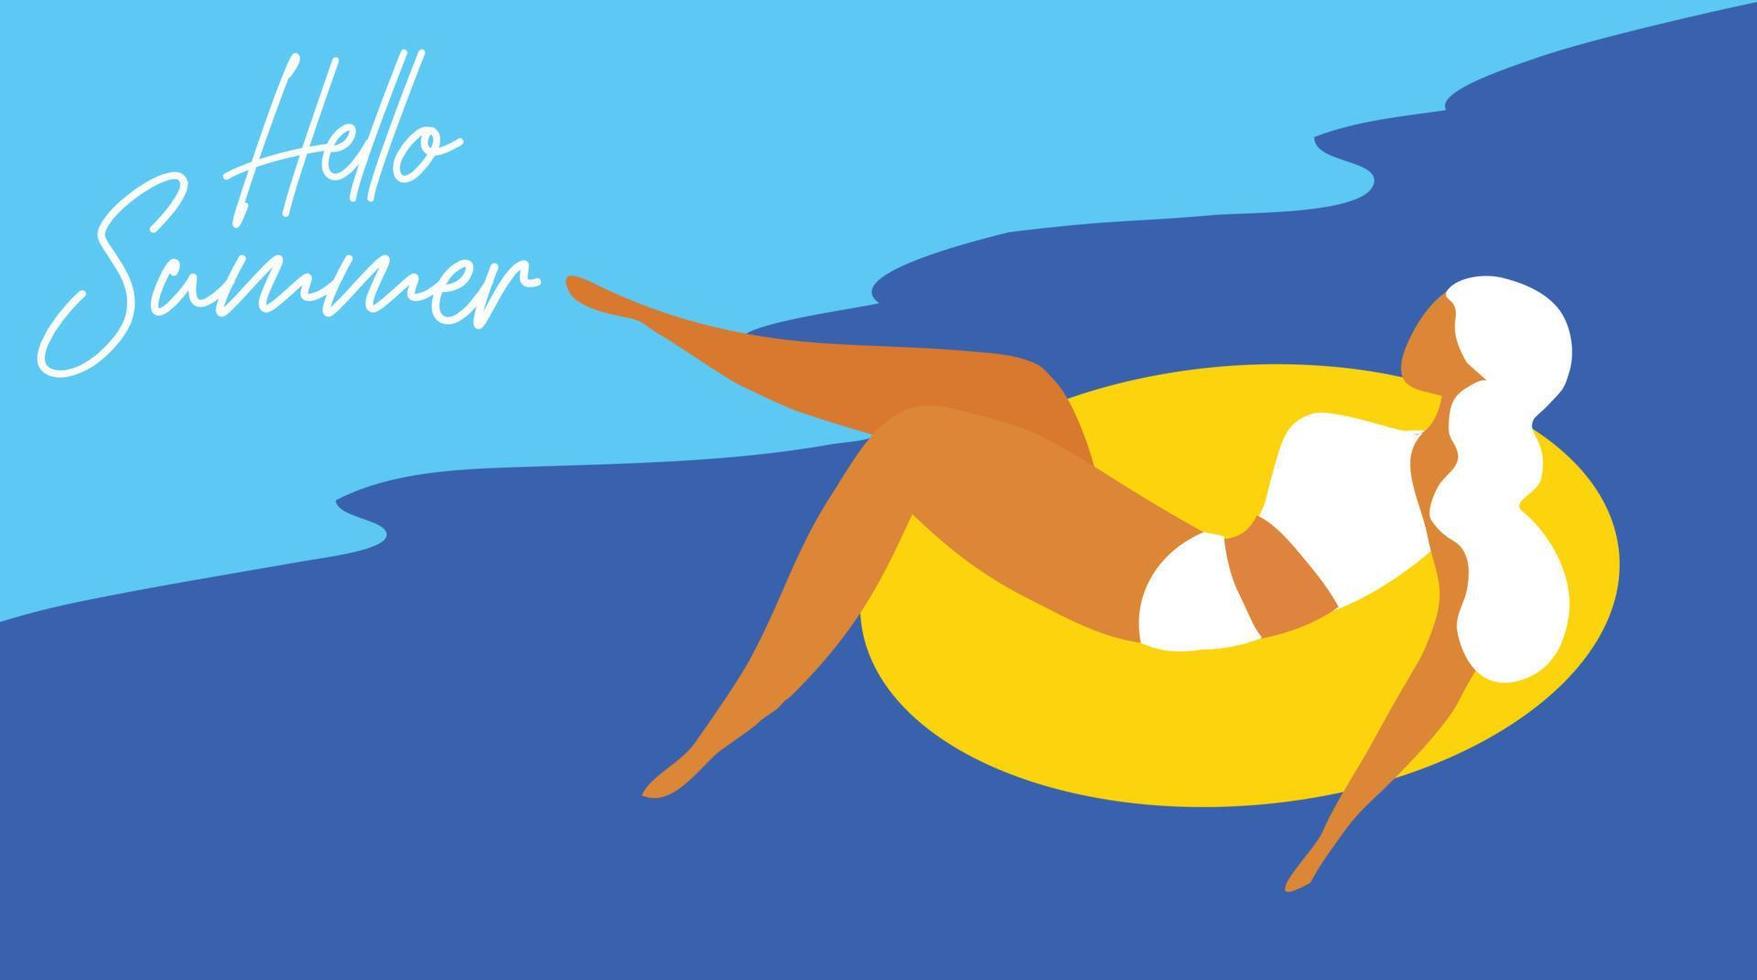 Hello summer lettering on bikini woman on yellow ring in sea vector illustration. Summer vacation holiday concept background